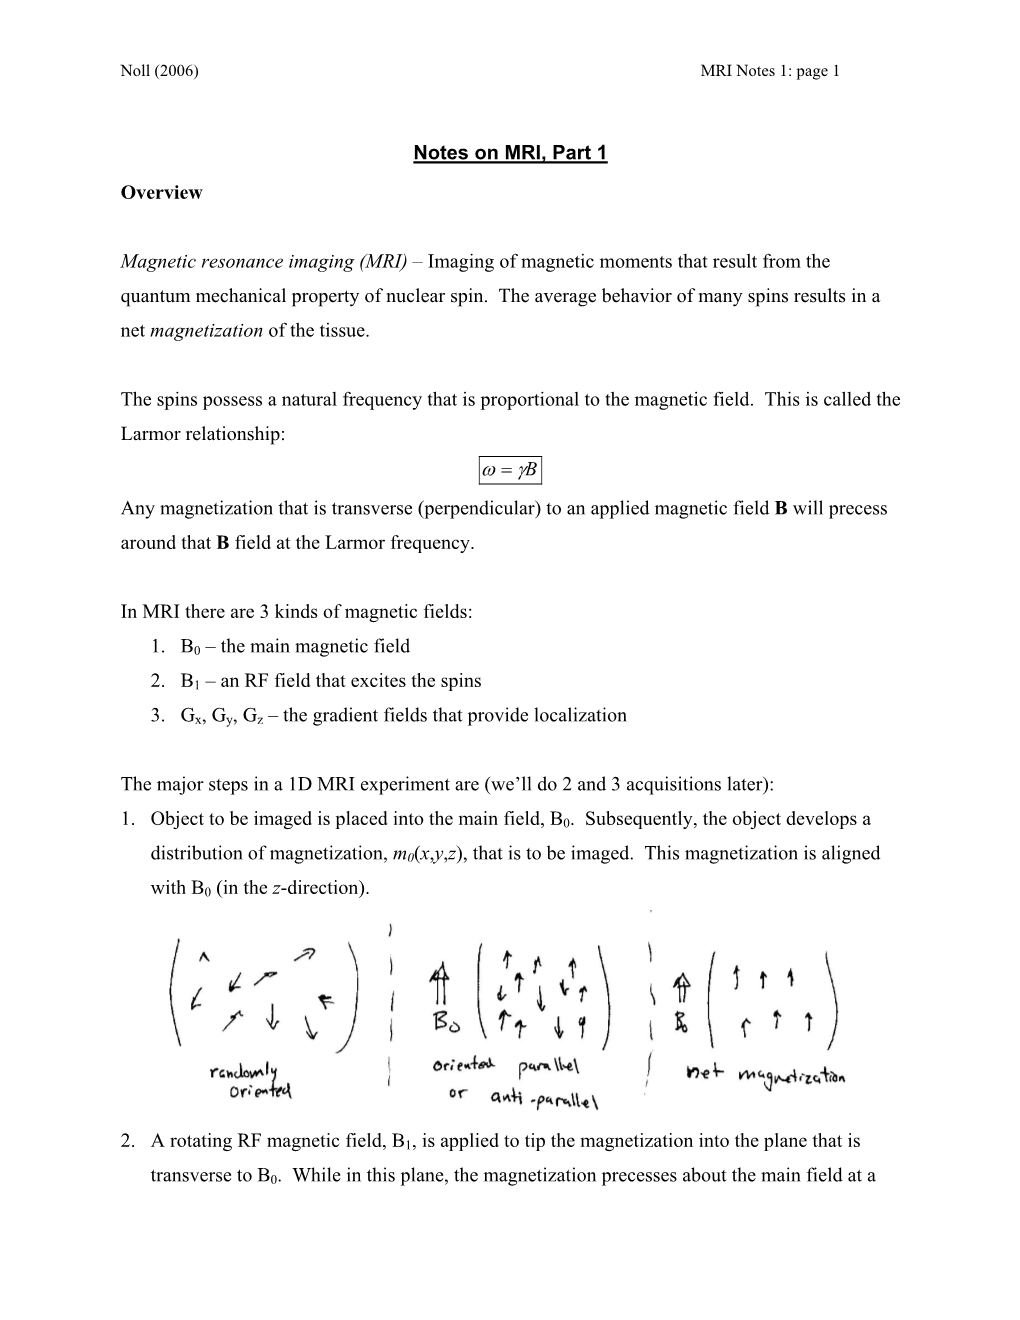 MRI Notes 1: Page 1